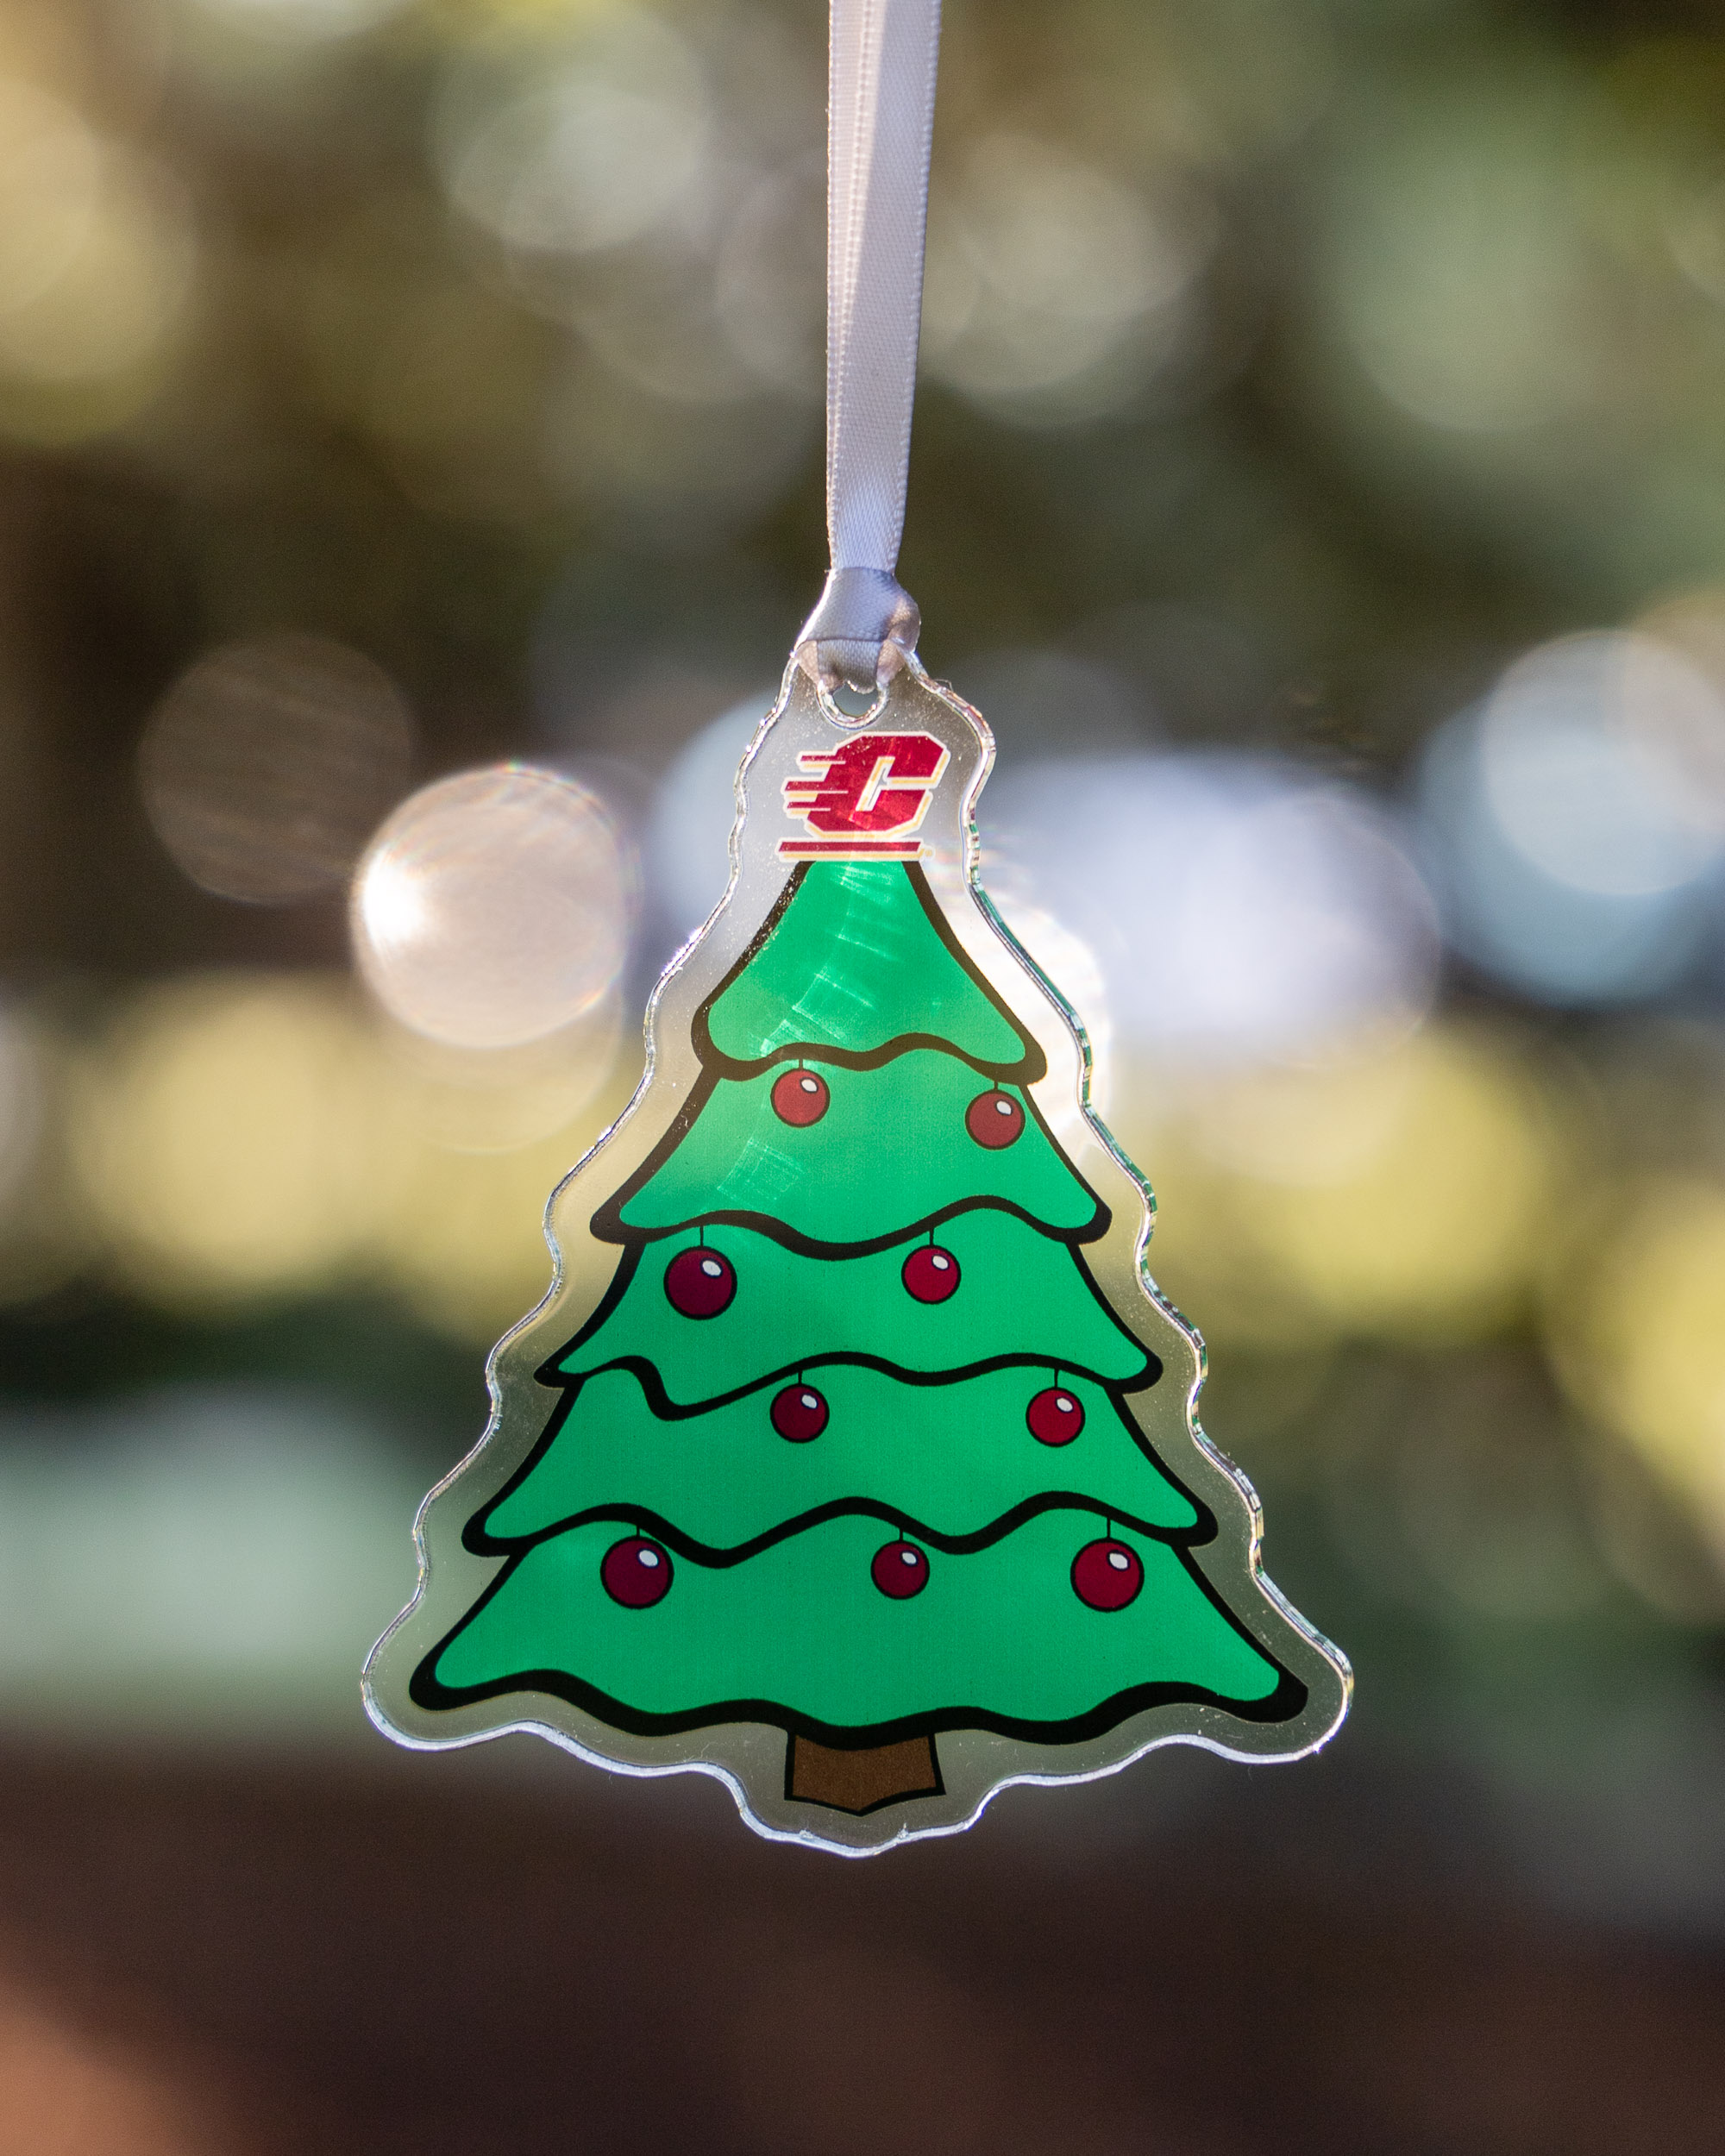 Action C Green & Maroon Christmas Tree Acrylic Ornament<br><brand>COLOR SHOCK</brand>